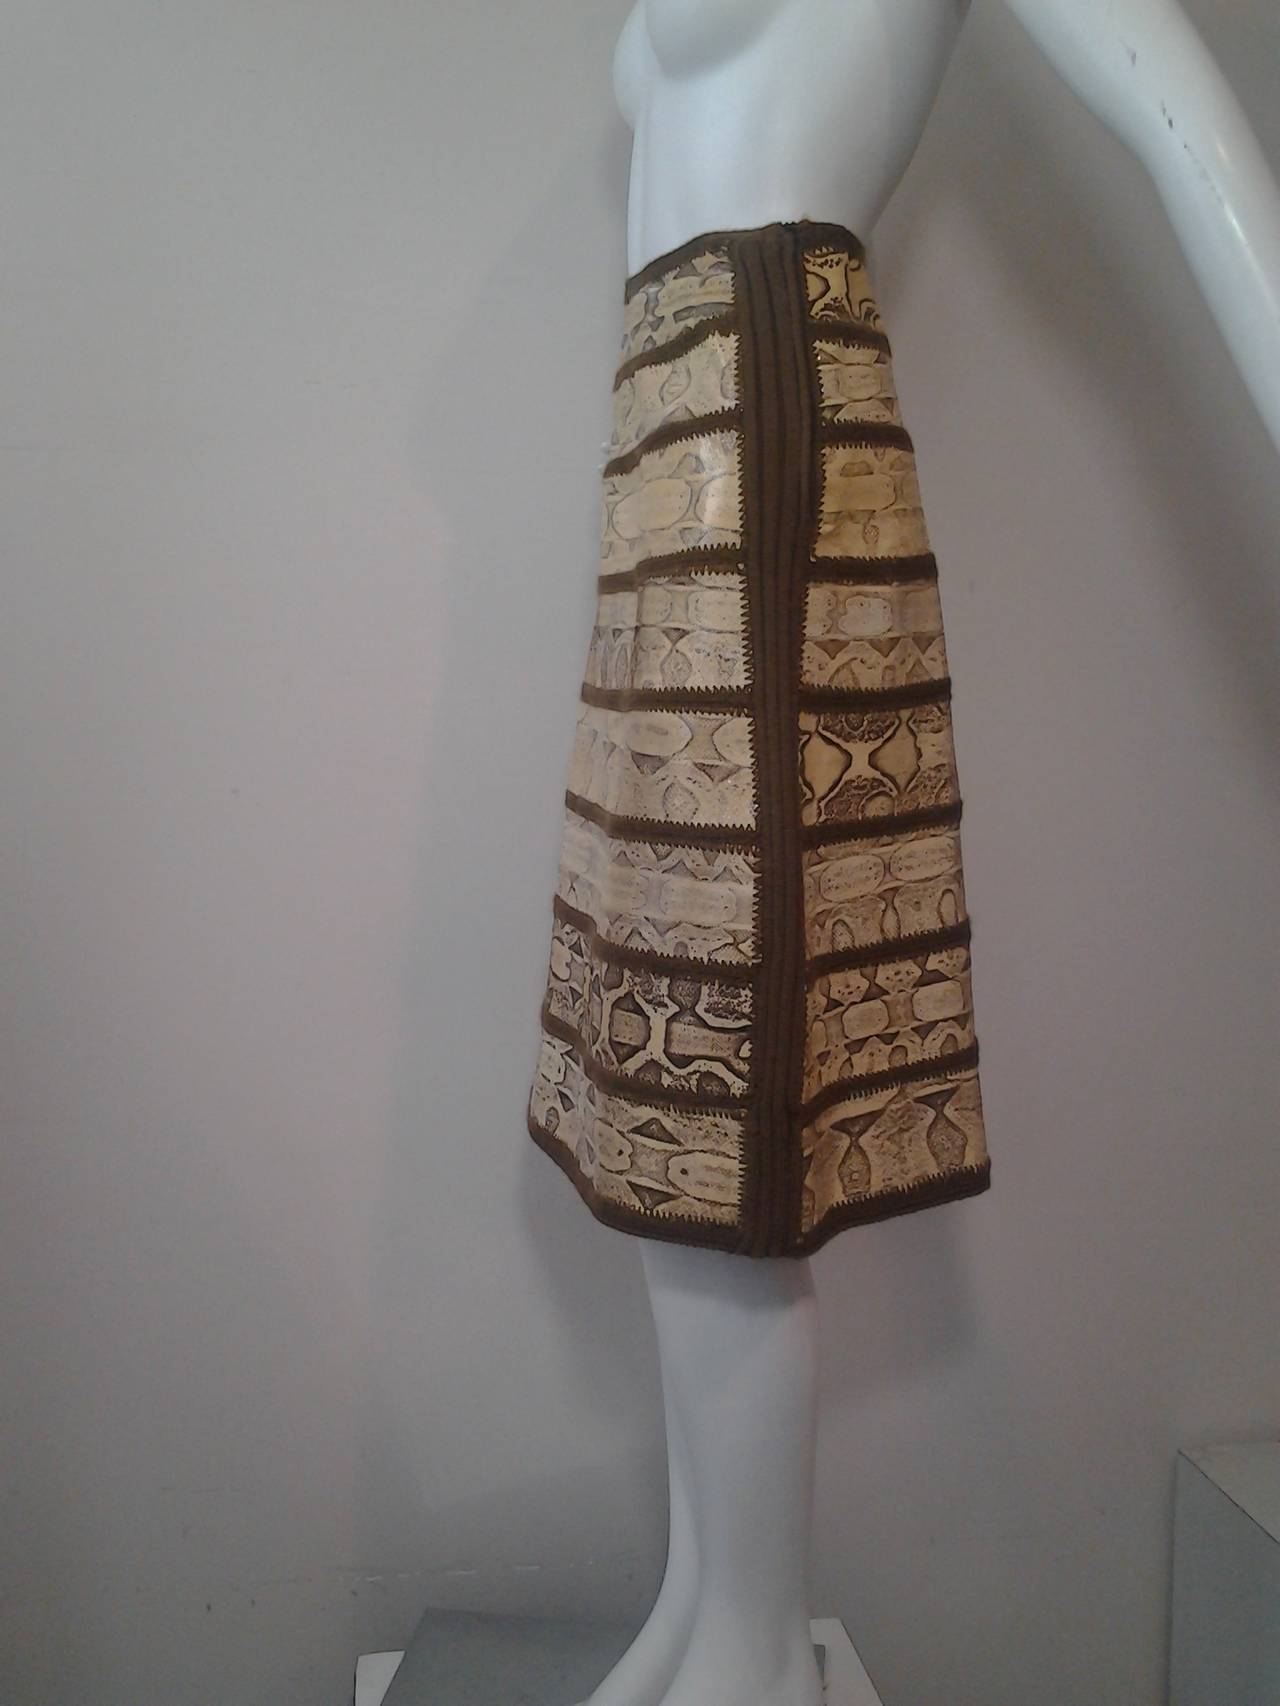 A 1970s J. Tiktiner serpent skin paneled skirt with lining fabric.  Side zipper. Crochets insets join sections of skin.  Fabulous!  Cote D'Azure, Nice, France for I. Magnin.